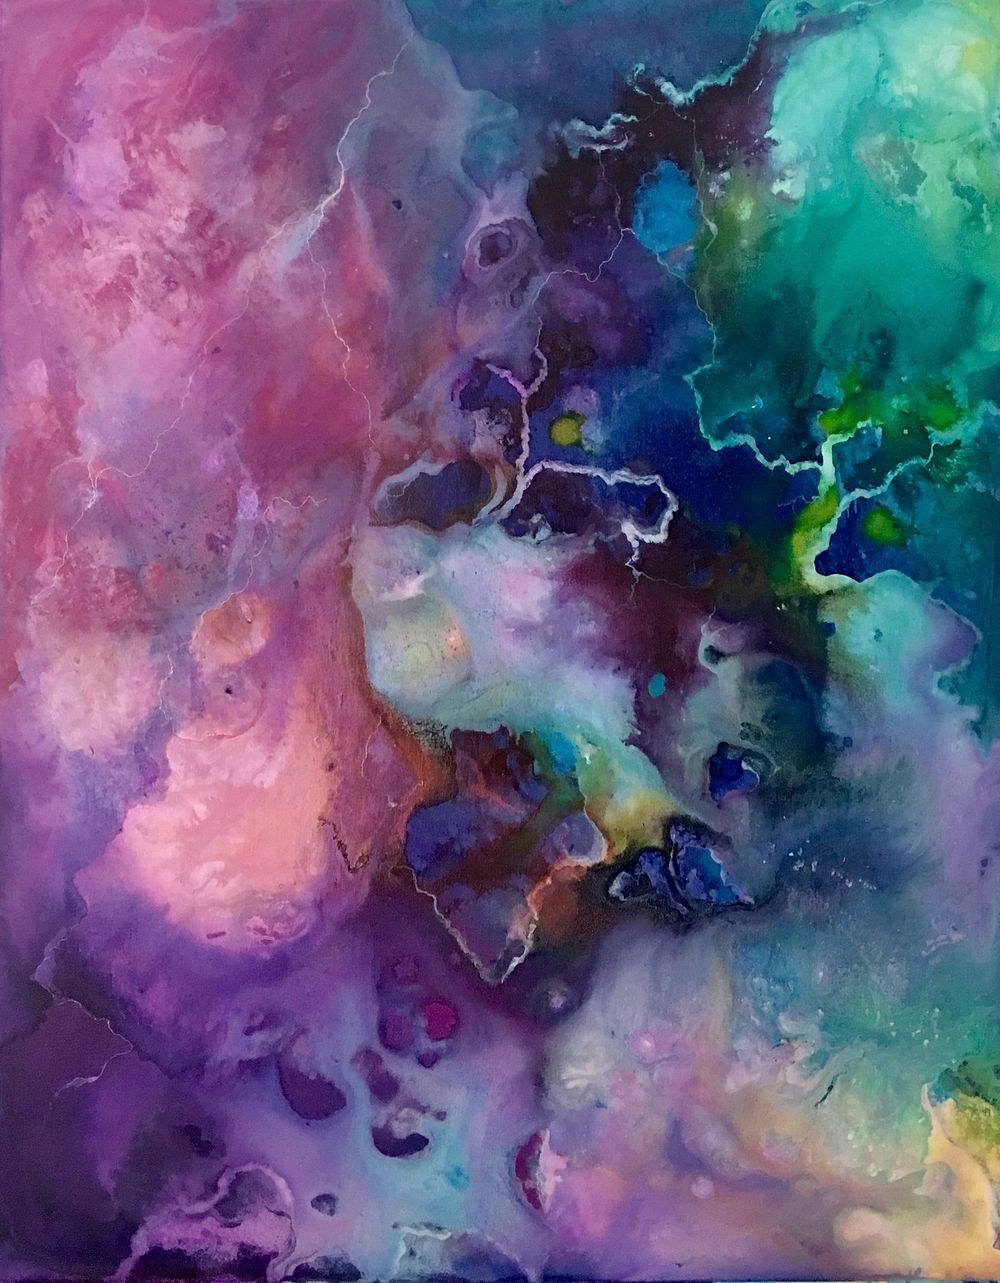 Free abstract watercolor background image, public domain CC0 photo.